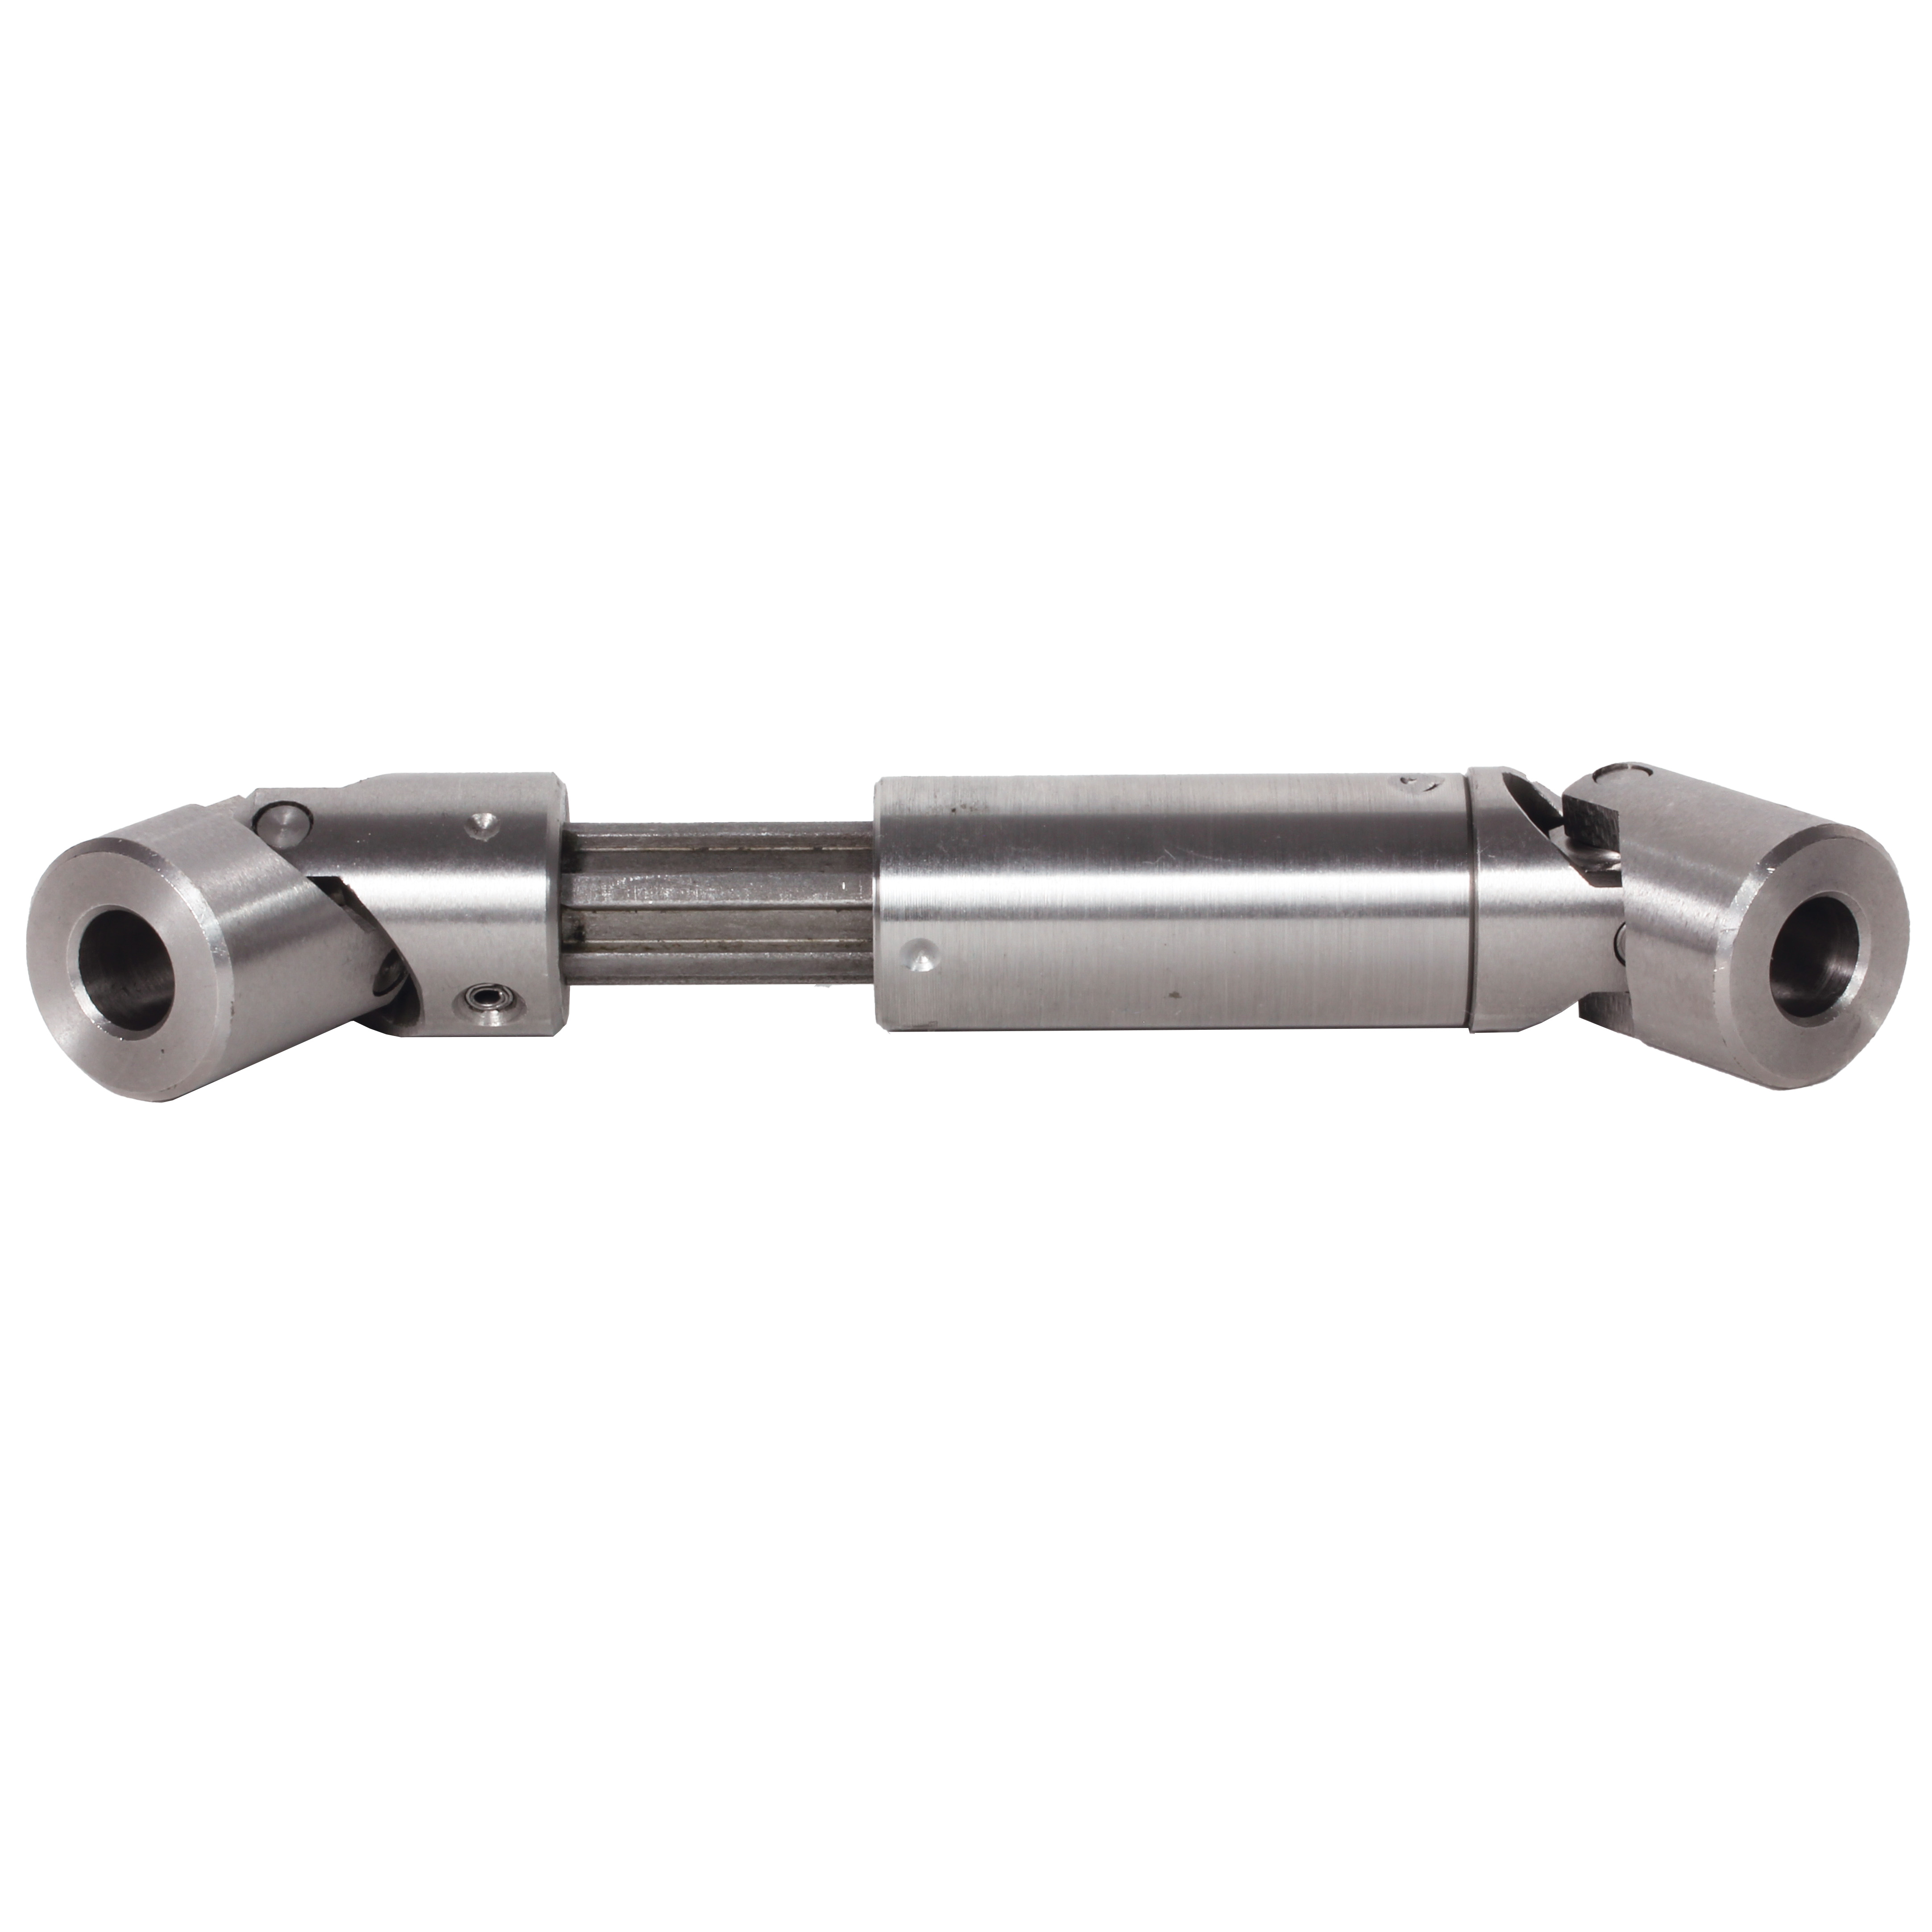 Telescopic universal joint - Normal duty - Smooth hardened bushes - 